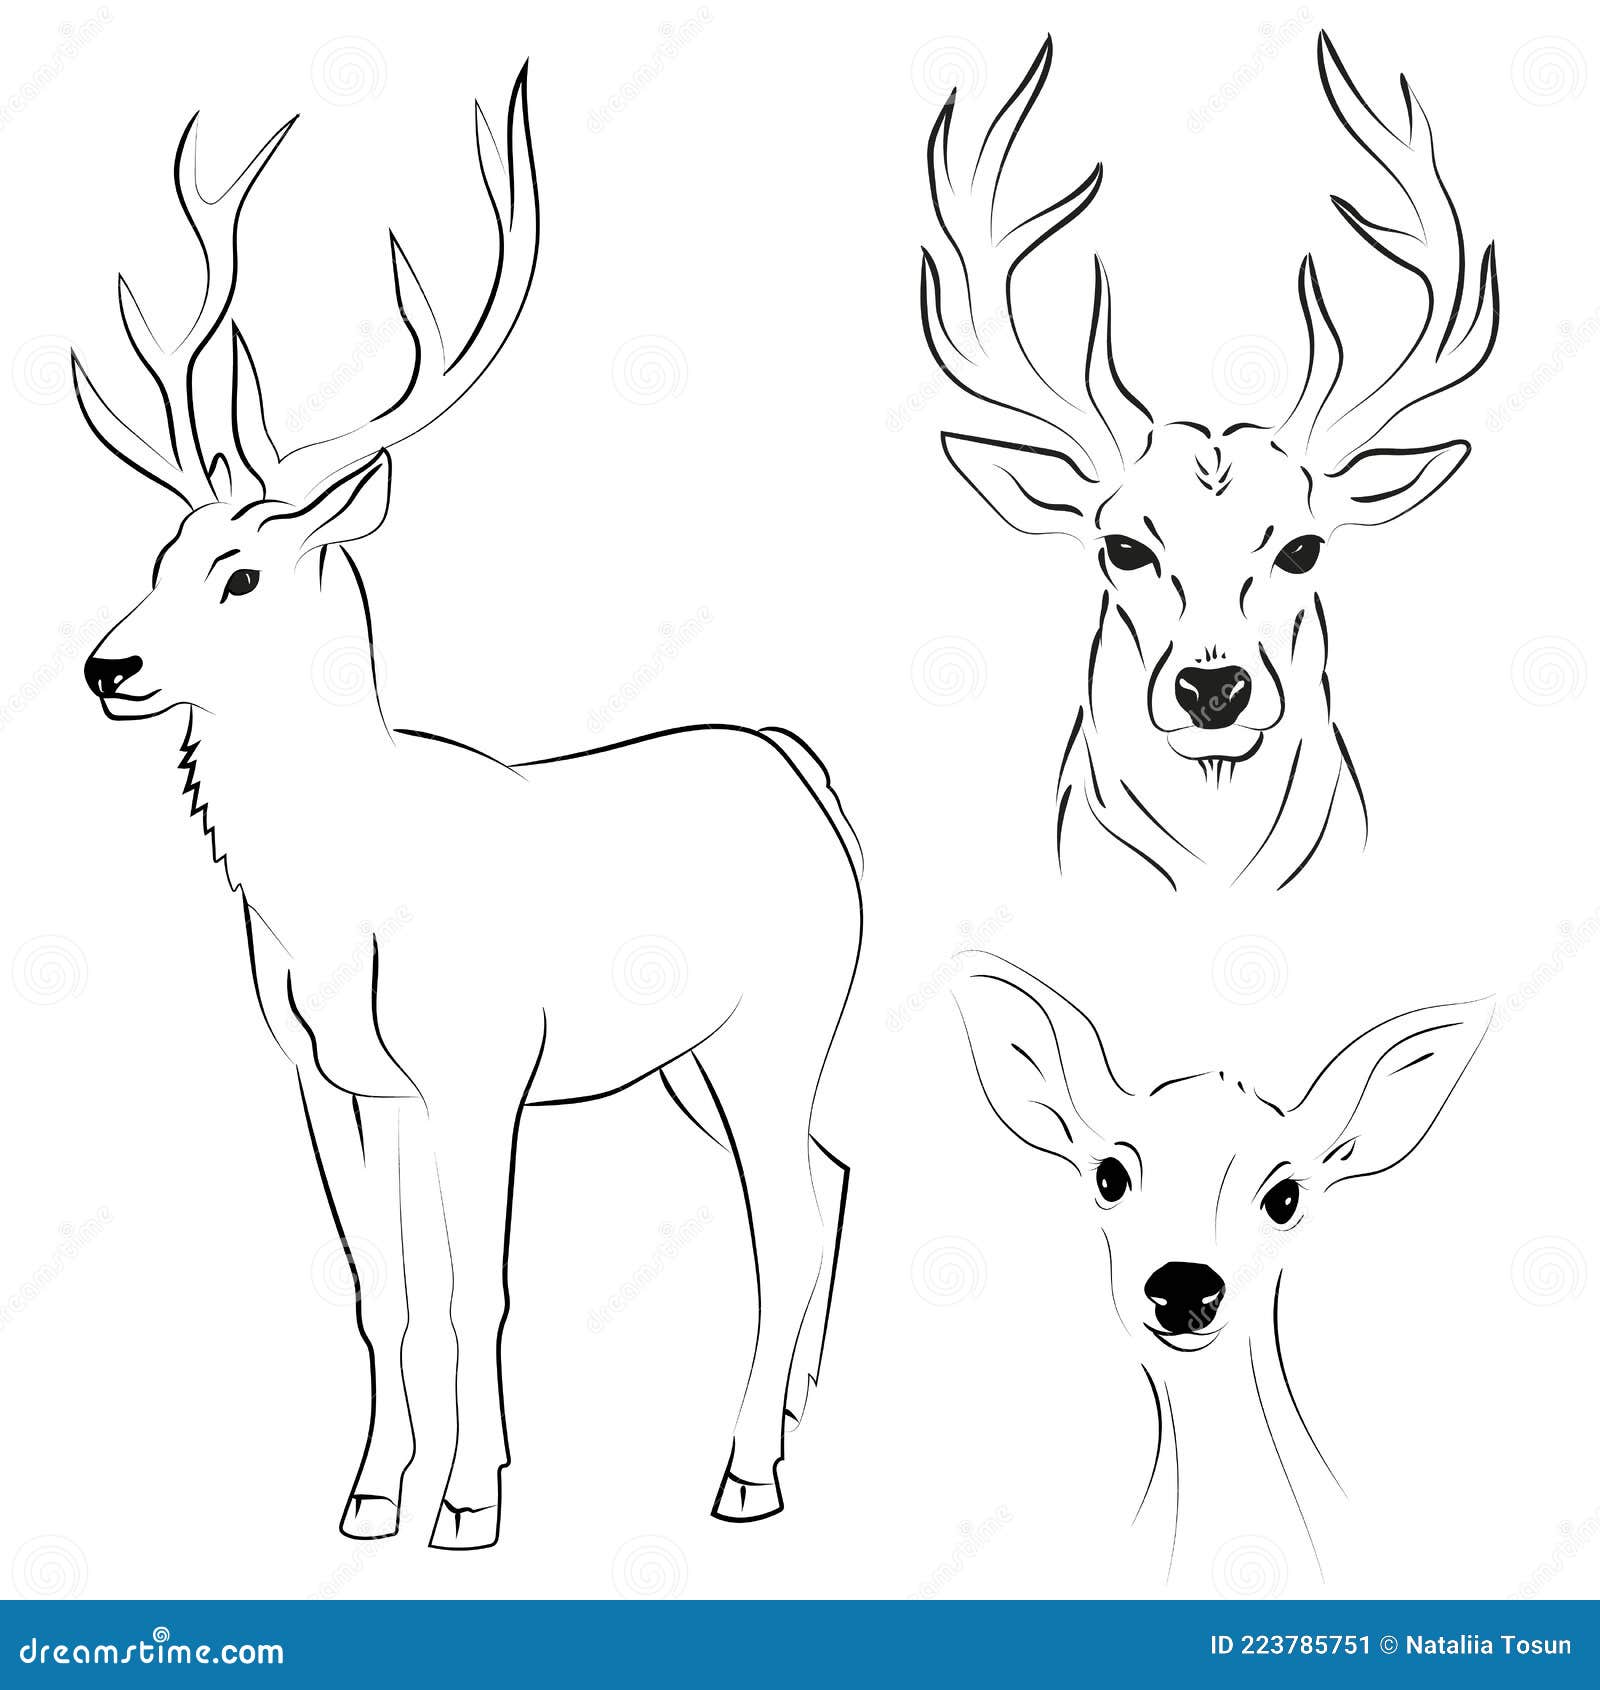 Cute Cartoon Deer Coloring Page Outline Sketch Drawing Vector Deer Images  Drawing Deer Images Outline Deer Images Sketch PNG and Vector with  Transparent Background for Free Download